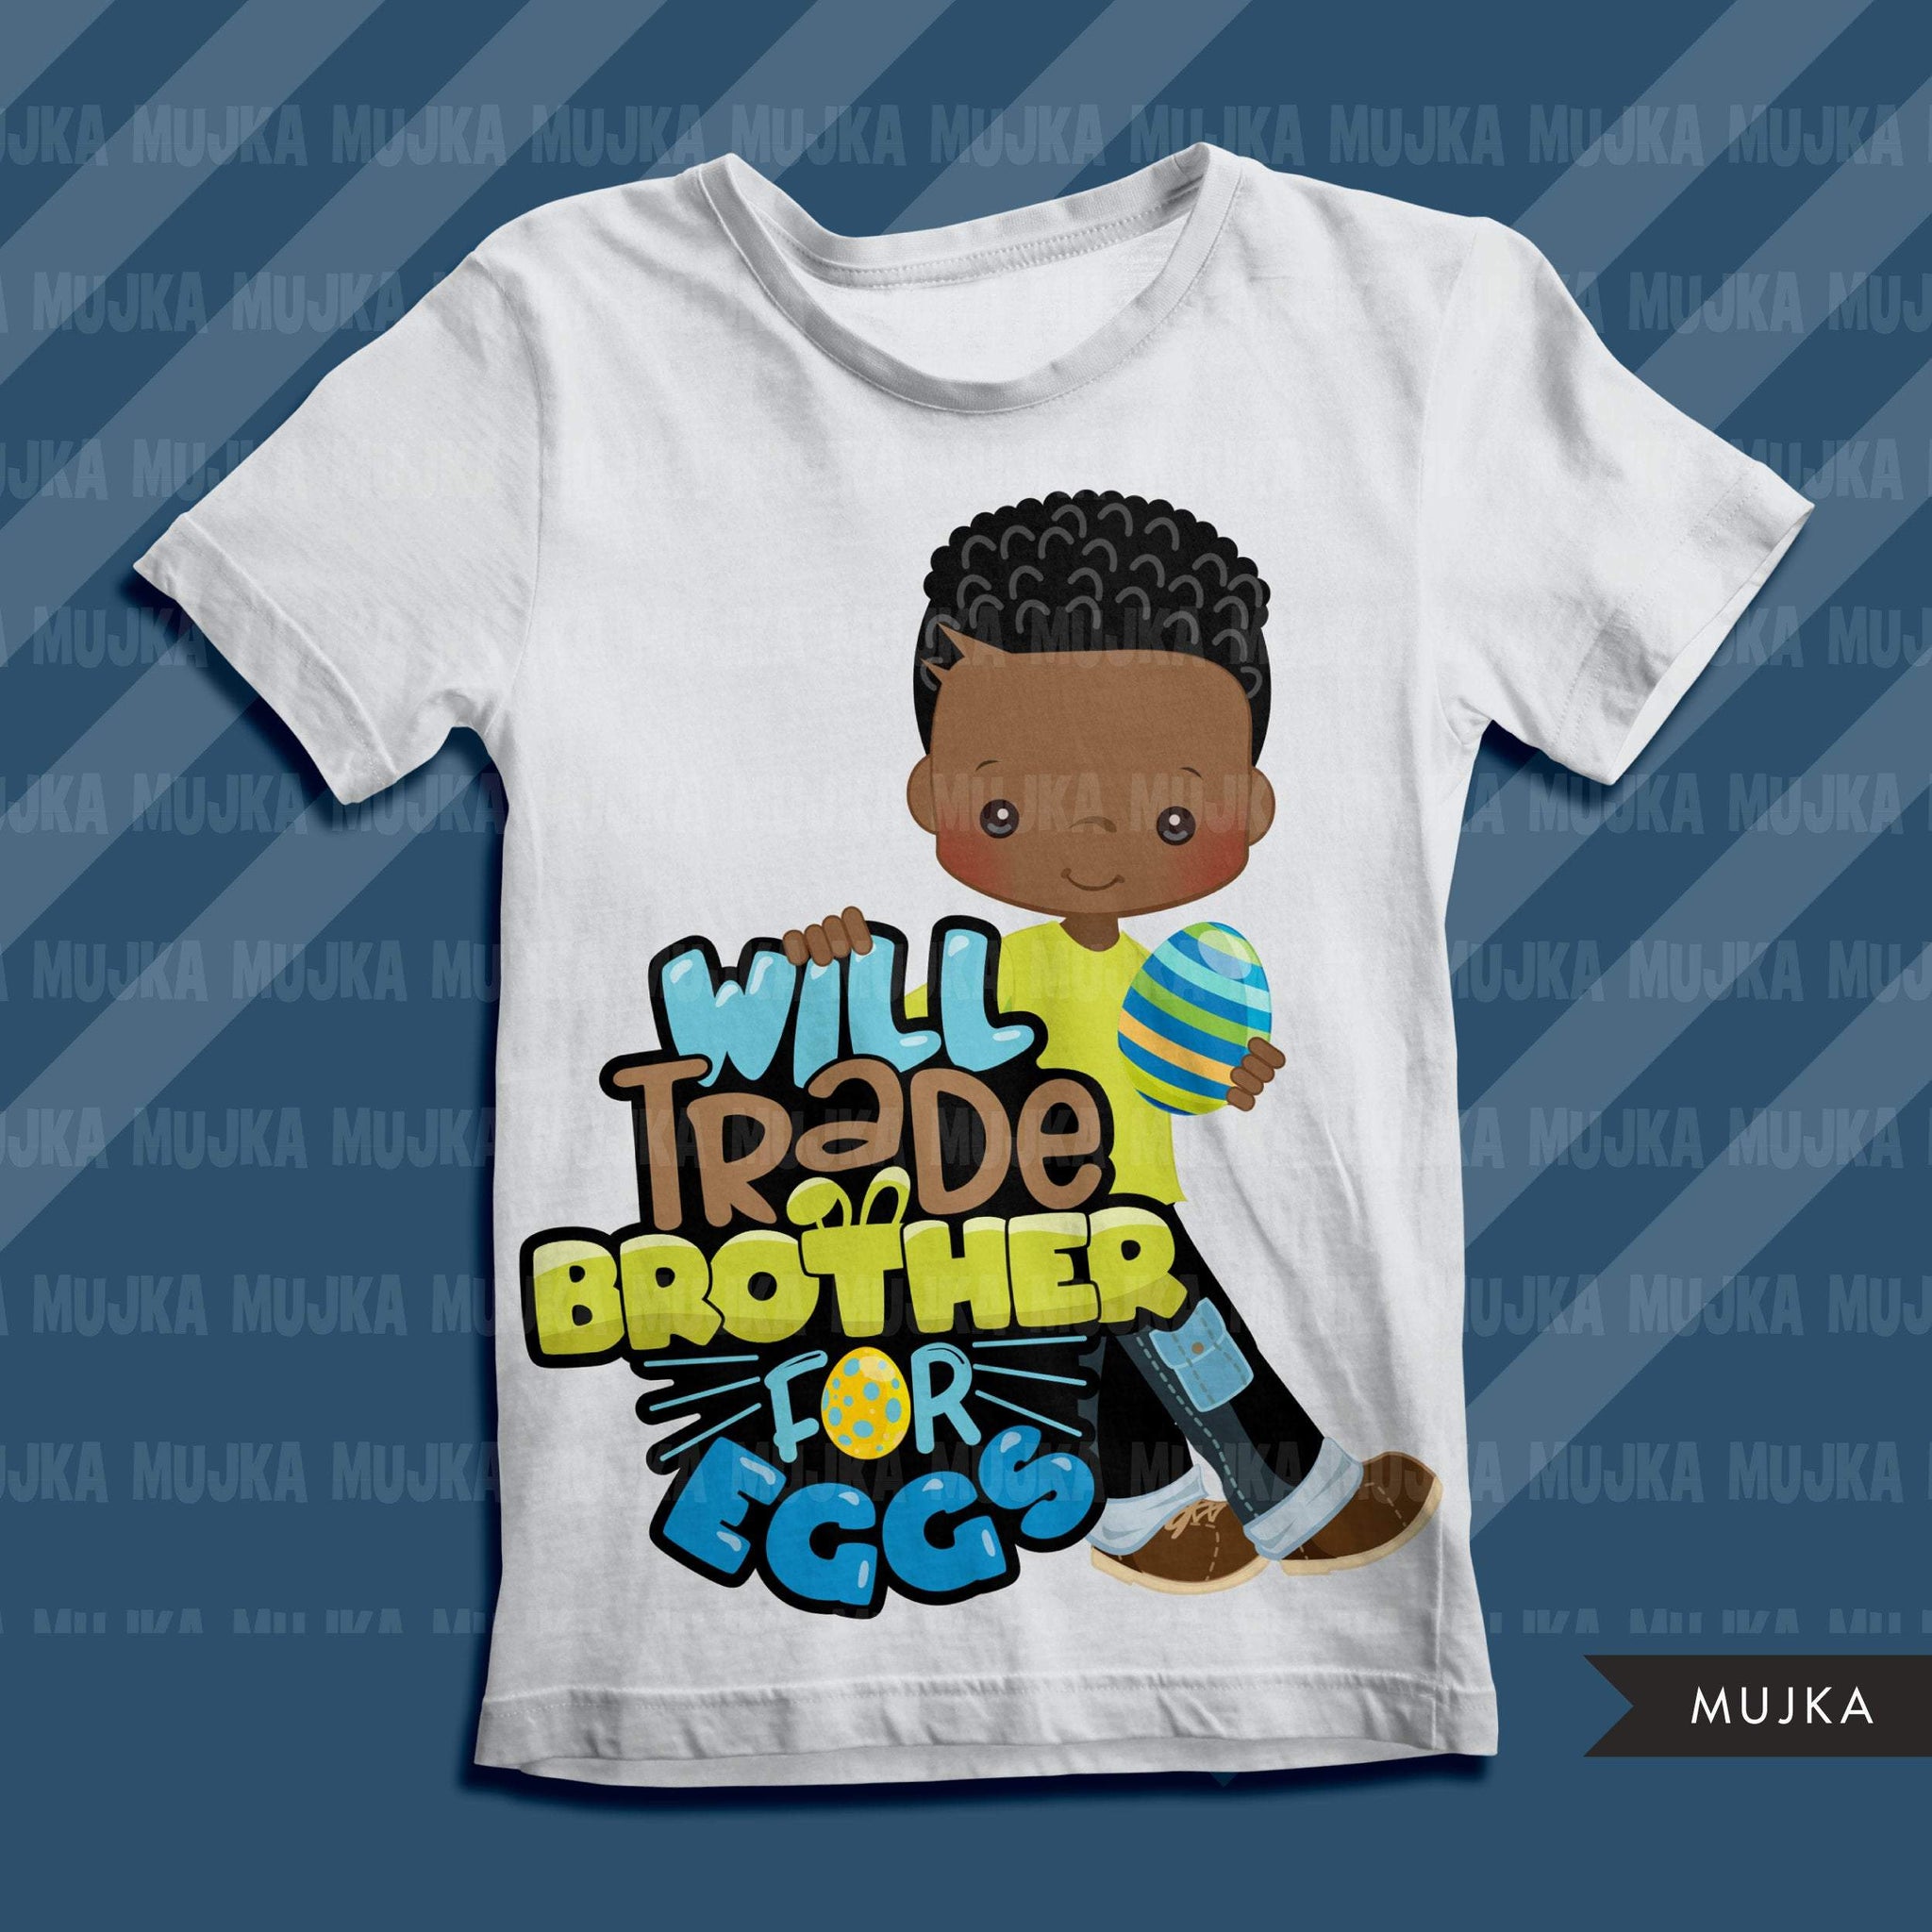 Easter PNG digital, Will trade brother for eggs Printable HTV sublimation image transfer clipart, t-shirt Afro black boy graphics